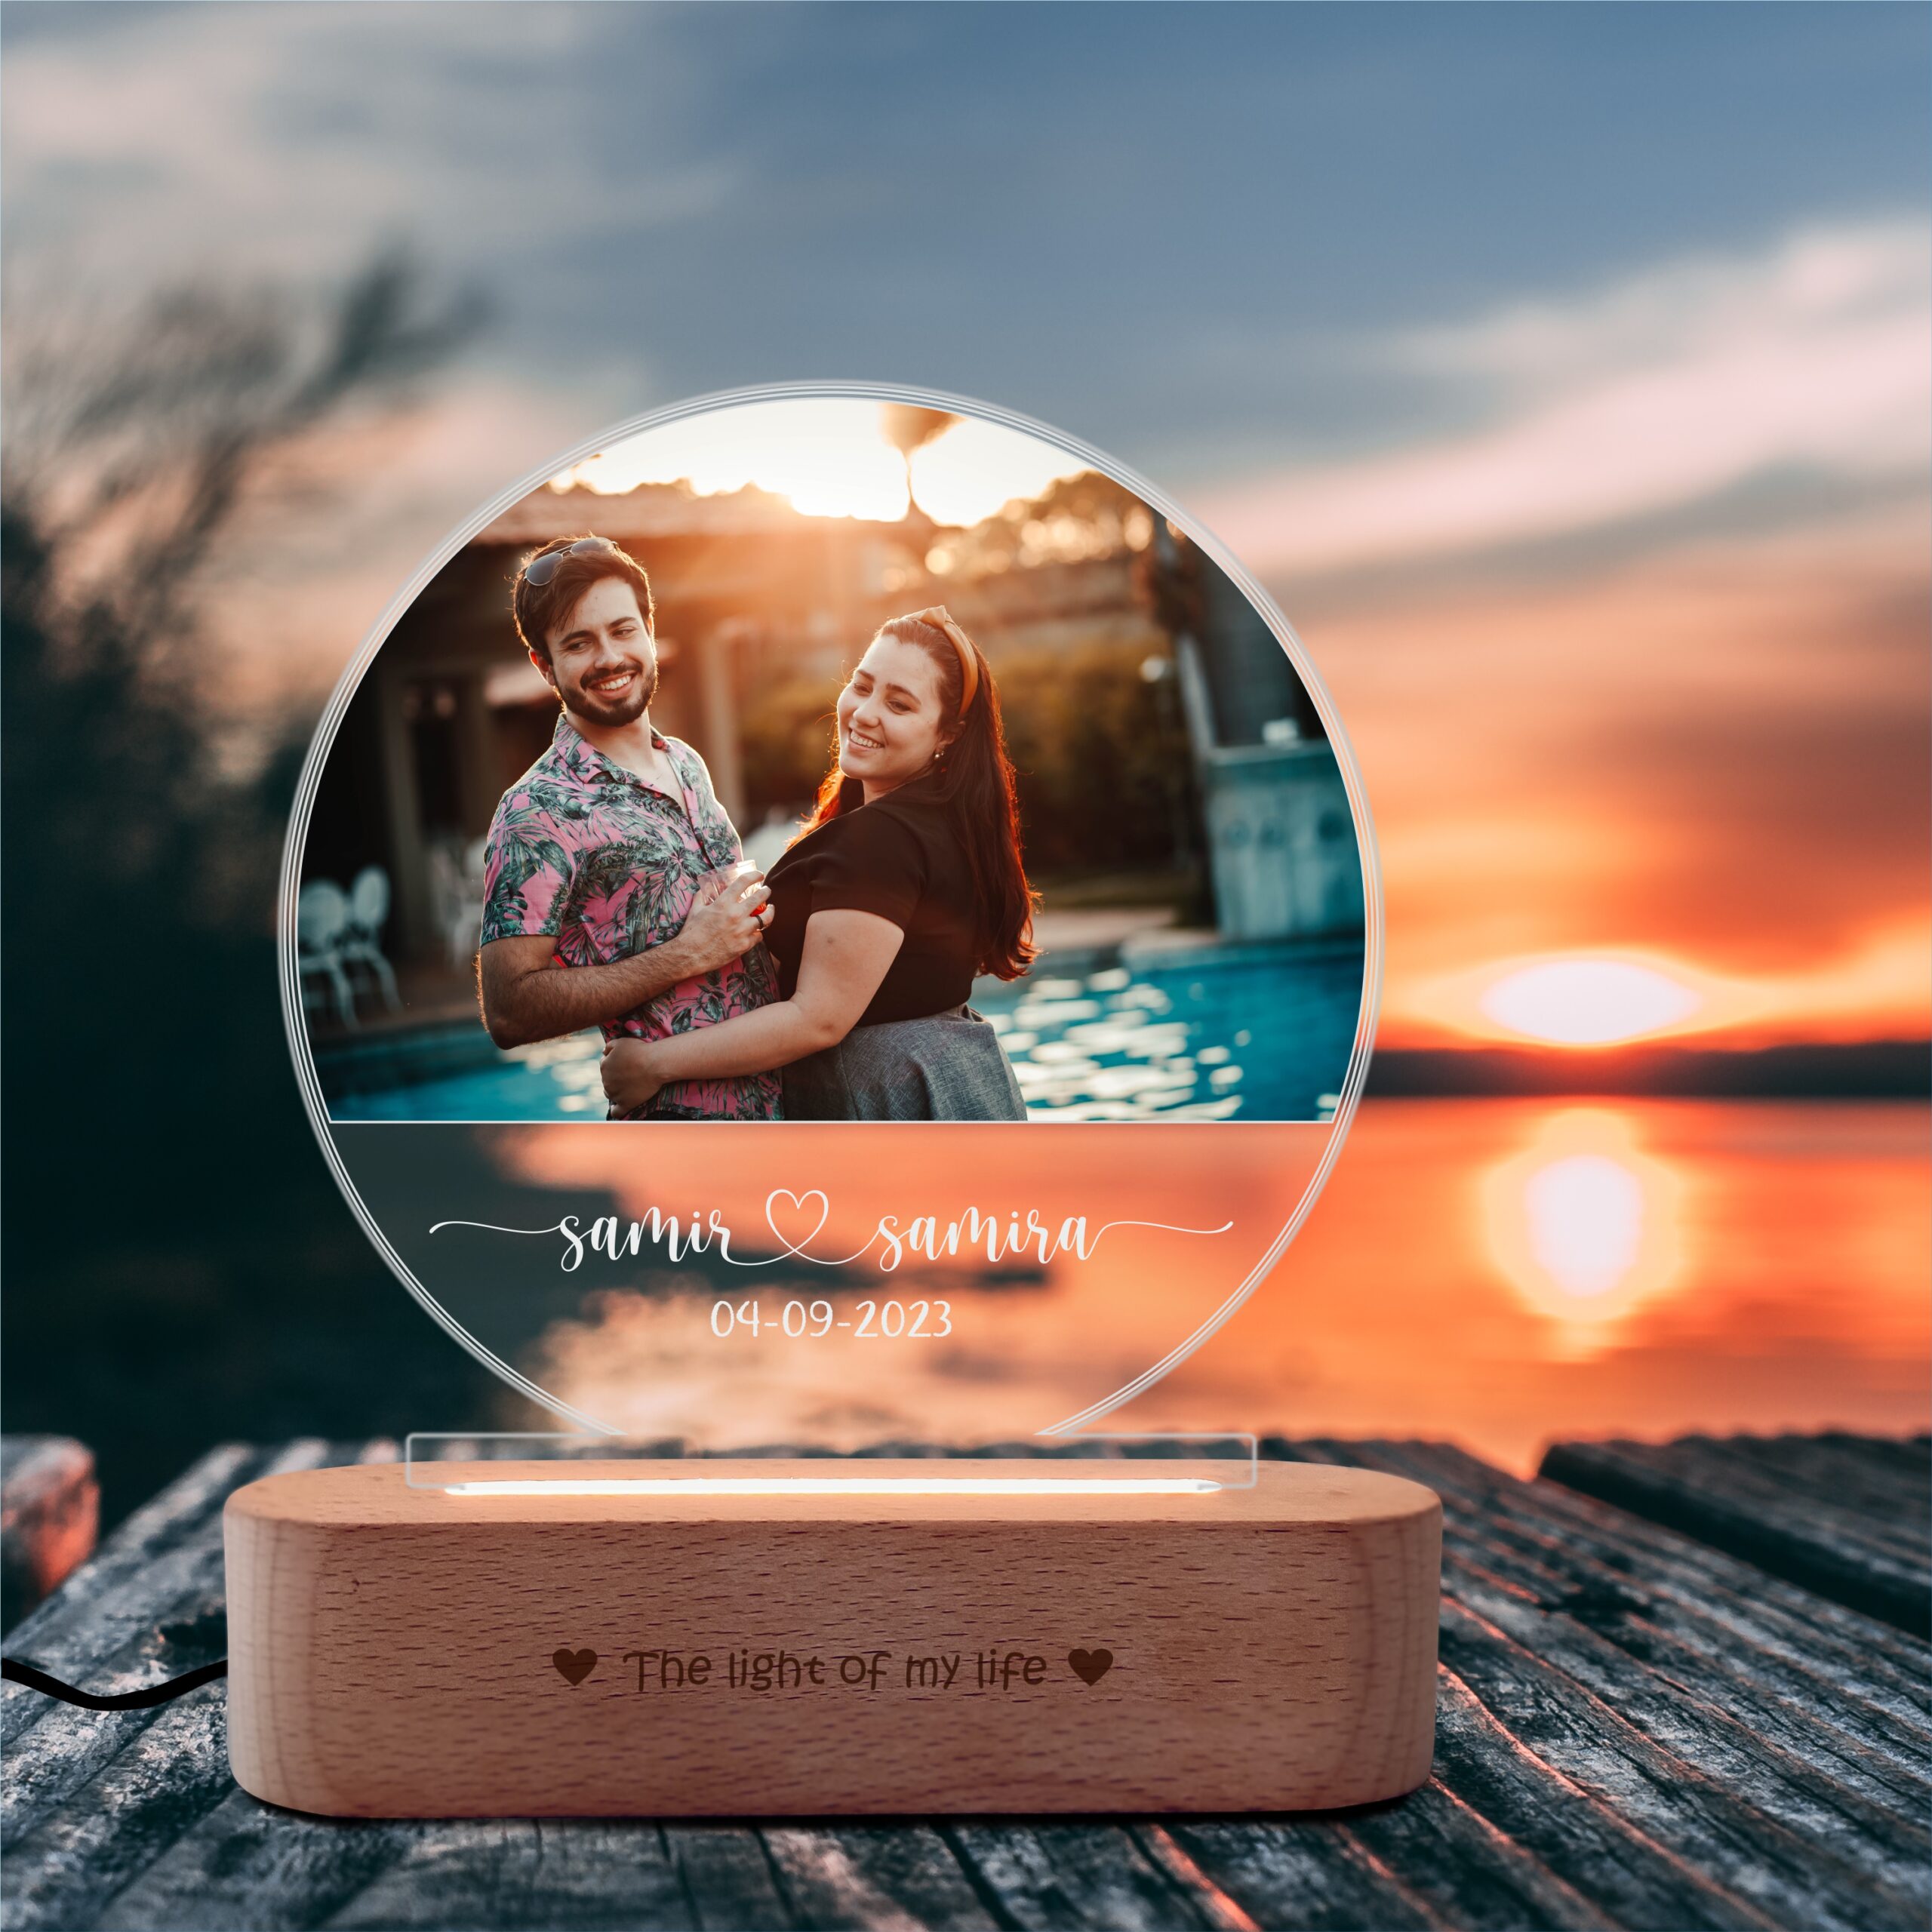 Nostalgia - Personalized rotating photo lamp - Birthday gift for wife.